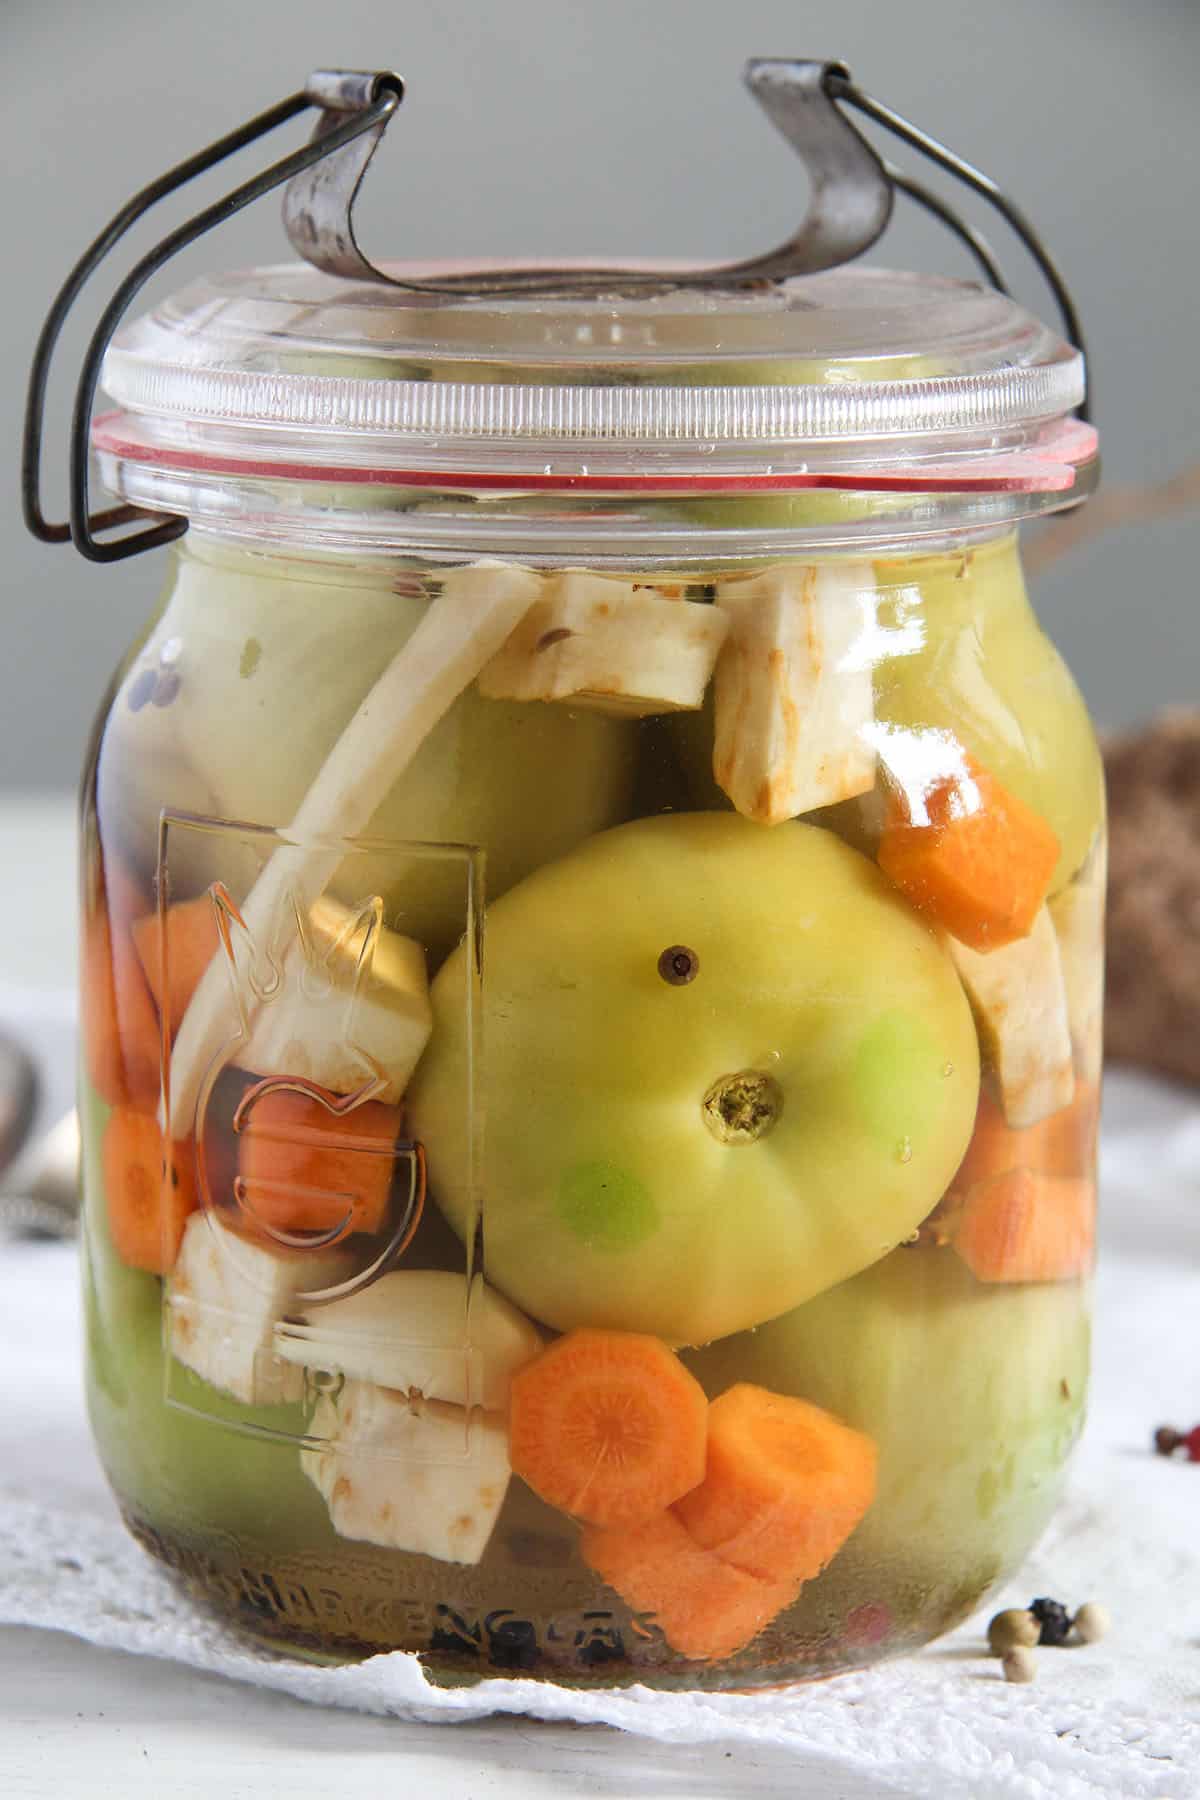 romanian green tomato pickles with horseradish and carrots in a jar.